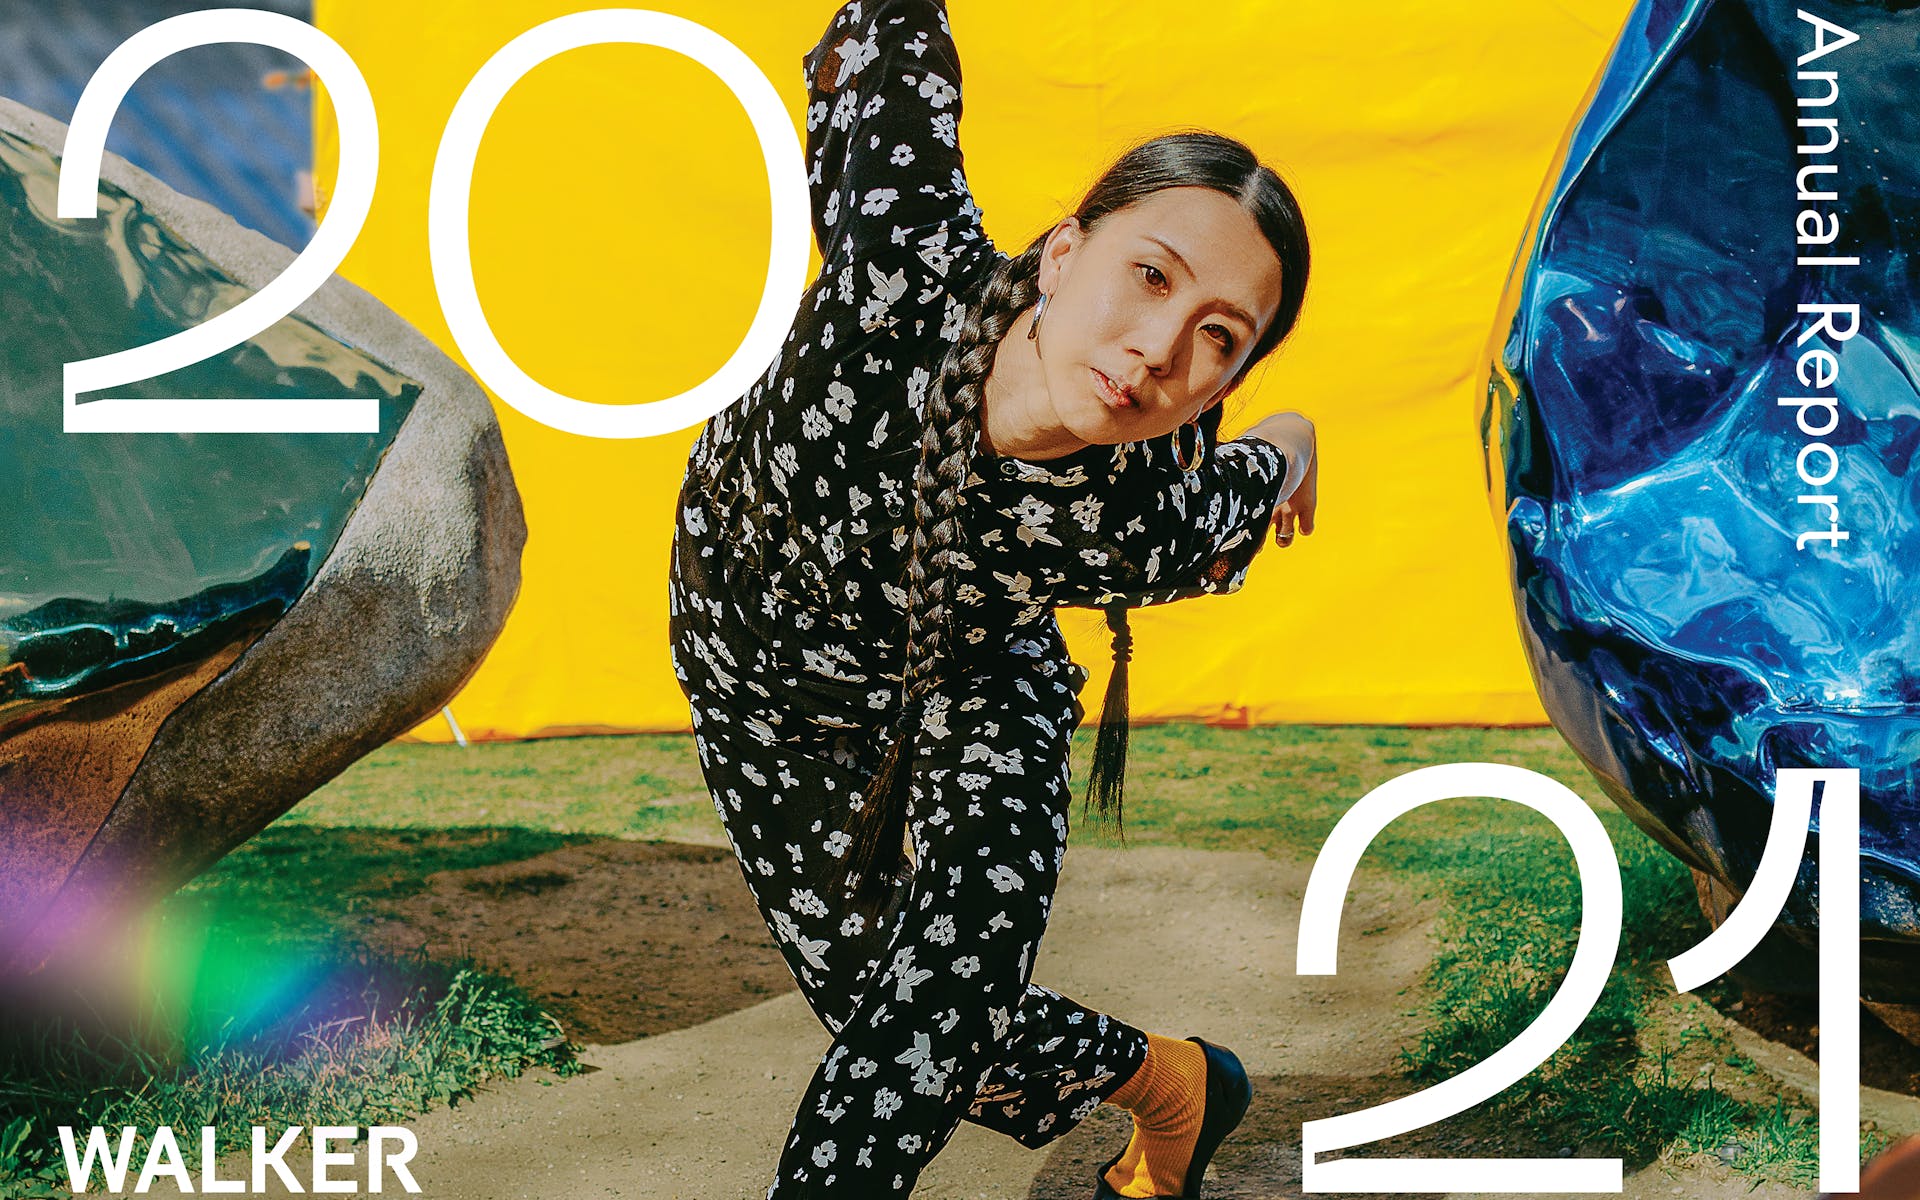 Dancer in front of yellow background with text that says "20 21 Walker Annual Report"